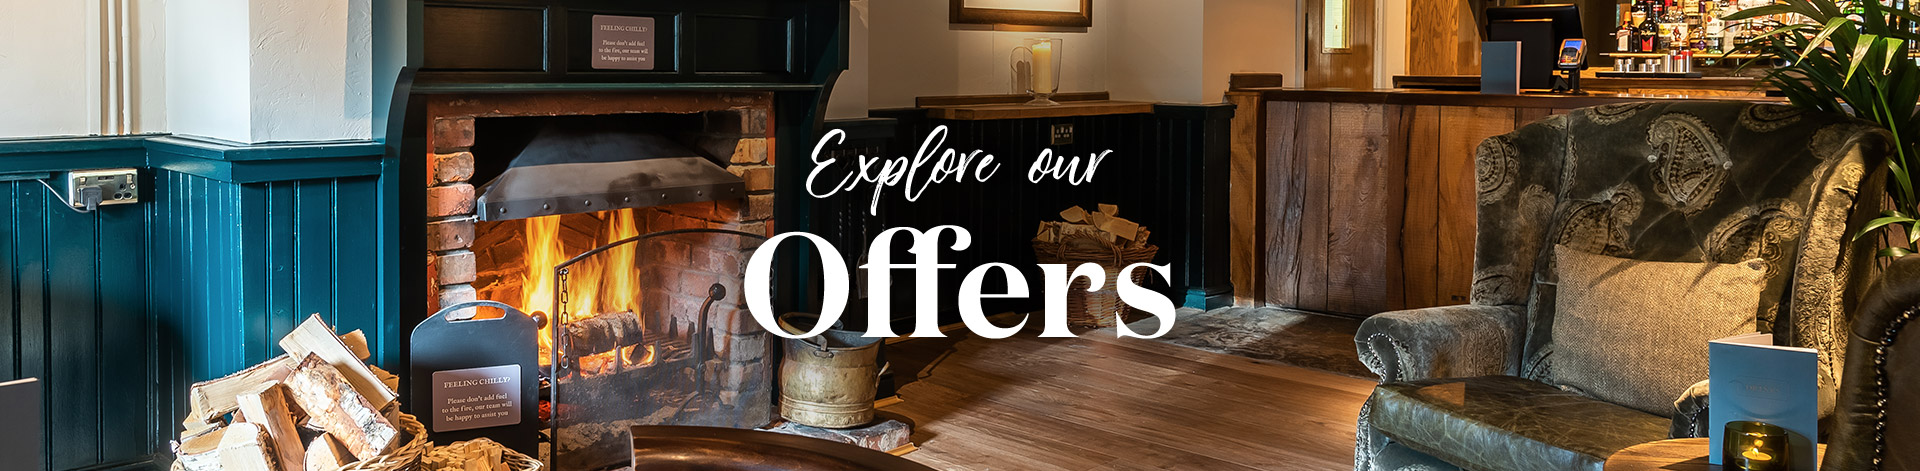 Our latest offers at The Walton Fox